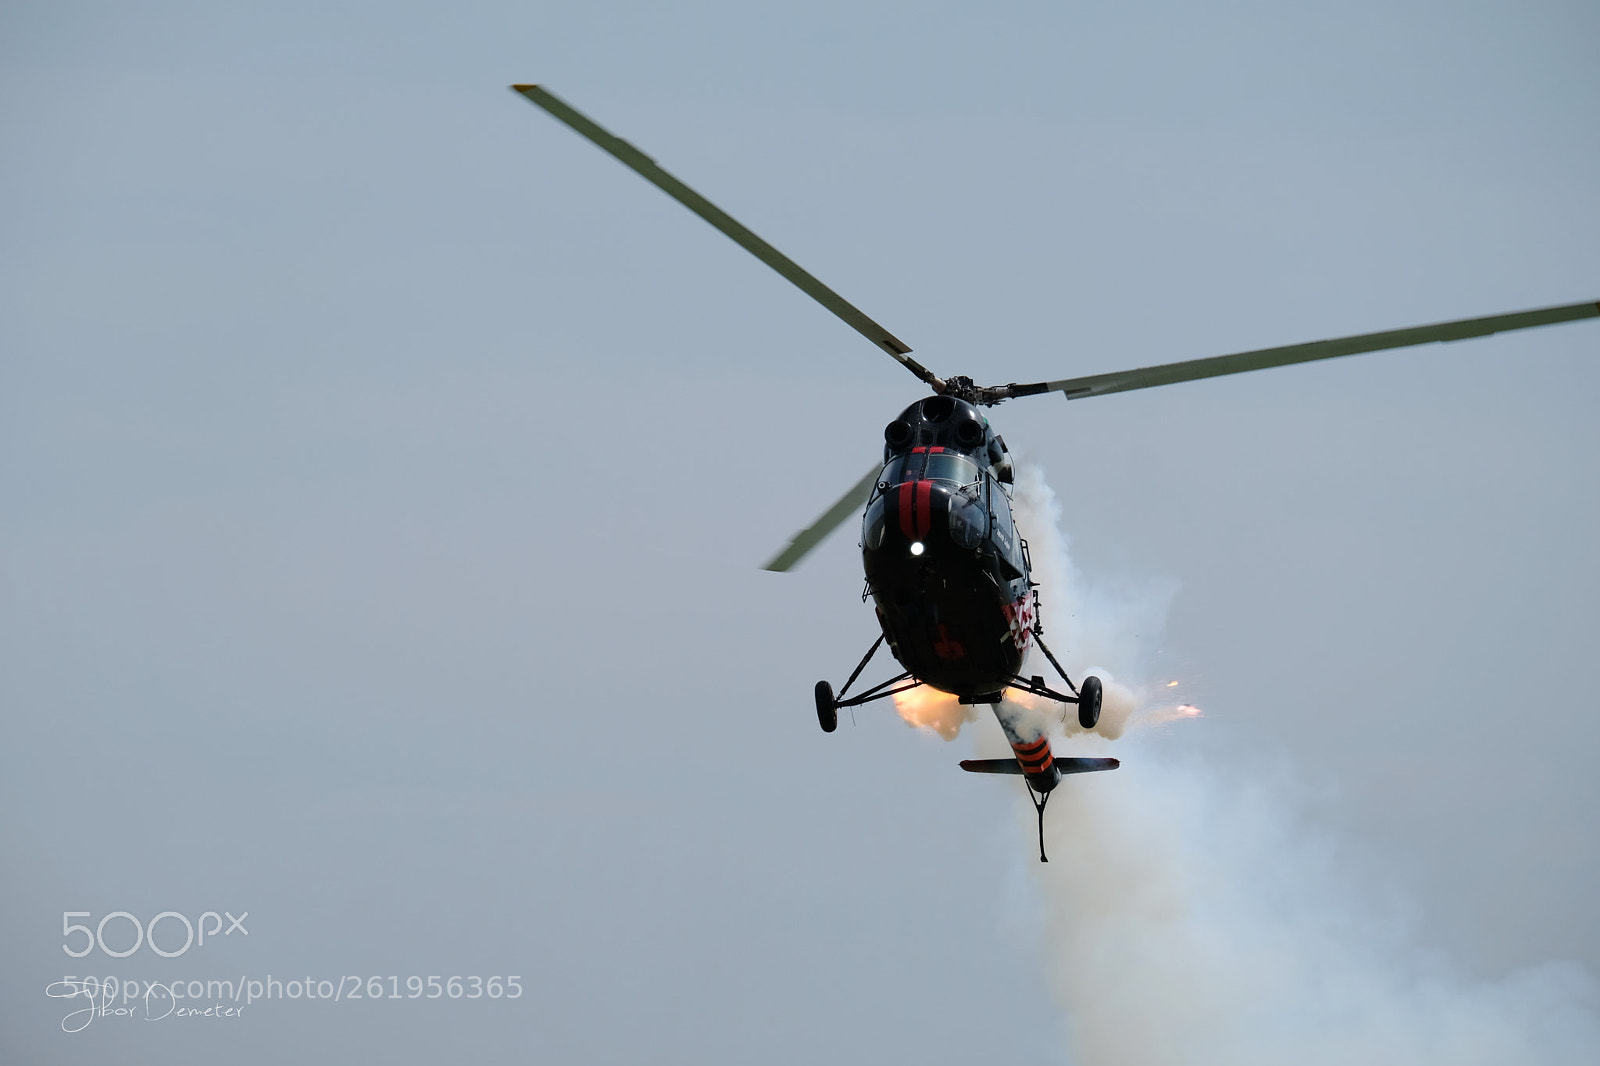 Fujifilm X-T2 sample photo. Helicopter show photography